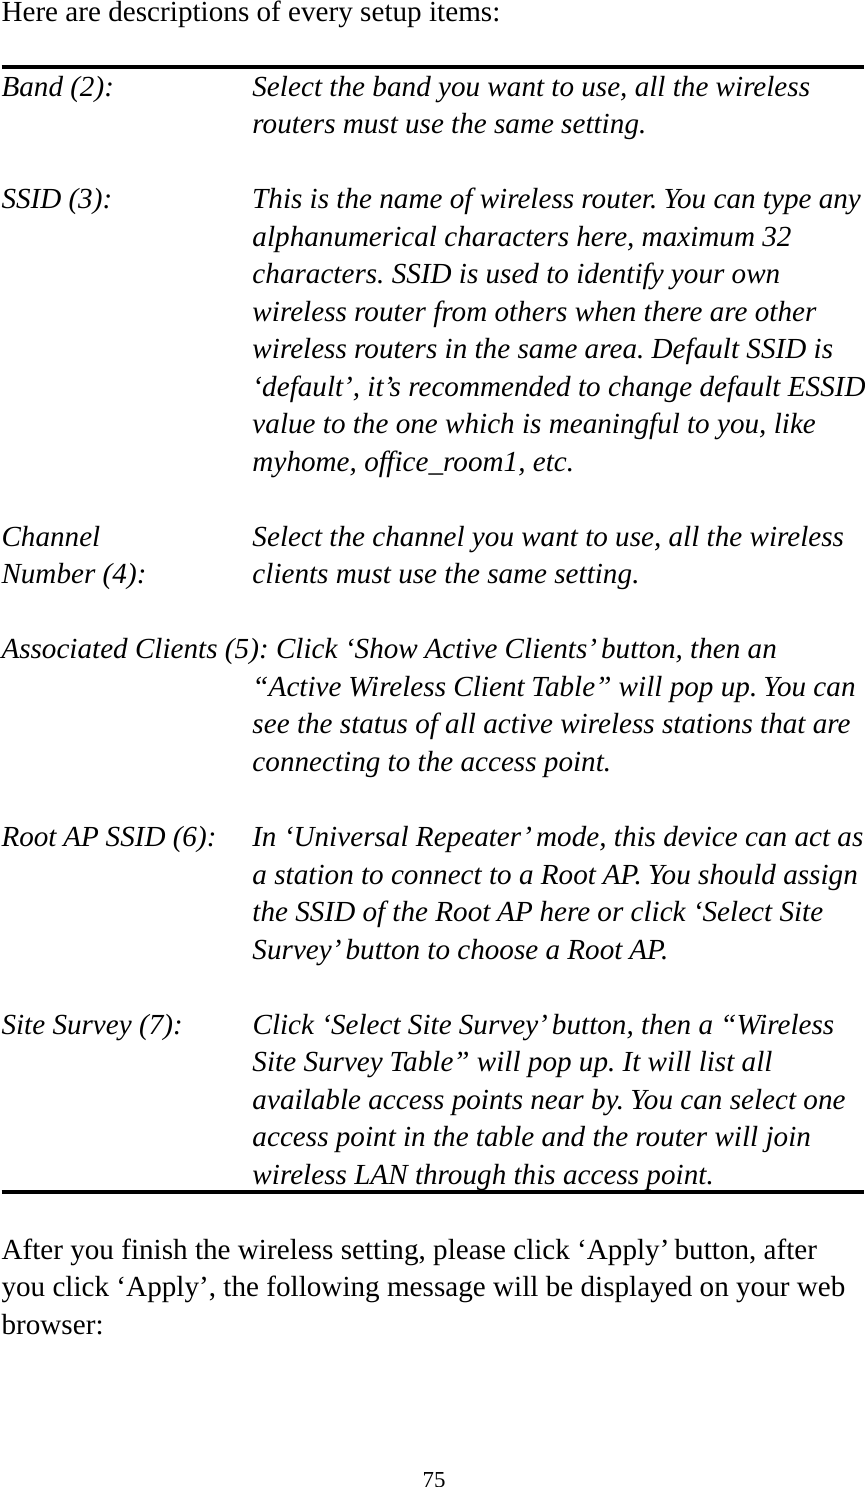 75 Here are descriptions of every setup items:  Band (2):  Select the band you want to use, all the wireless routers must use the same setting.  SSID (3):  This is the name of wireless router. You can type any alphanumerical characters here, maximum 32 characters. SSID is used to identify your own wireless router from others when there are other wireless routers in the same area. Default SSID is ‘default’, it’s recommended to change default ESSID value to the one which is meaningful to you, like myhome, office_room1, etc.  Channel  Select the channel you want to use, all the wireless Number (4):  clients must use the same setting.  Associated Clients (5): Click ‘Show Active Clients’ button, then an “Active Wireless Client Table” will pop up. You can see the status of all active wireless stations that are connecting to the access point.  Root AP SSID (6):  In ‘Universal Repeater’ mode, this device can act as a station to connect to a Root AP. You should assign the SSID of the Root AP here or click ‘Select Site Survey’ button to choose a Root AP.  Site Survey (7):  Click ‘Select Site Survey’ button, then a “Wireless Site Survey Table” will pop up. It will list all available access points near by. You can select one access point in the table and the router will join wireless LAN through this access point.  After you finish the wireless setting, please click ‘Apply’ button, after you click ‘Apply’, the following message will be displayed on your web browser:  